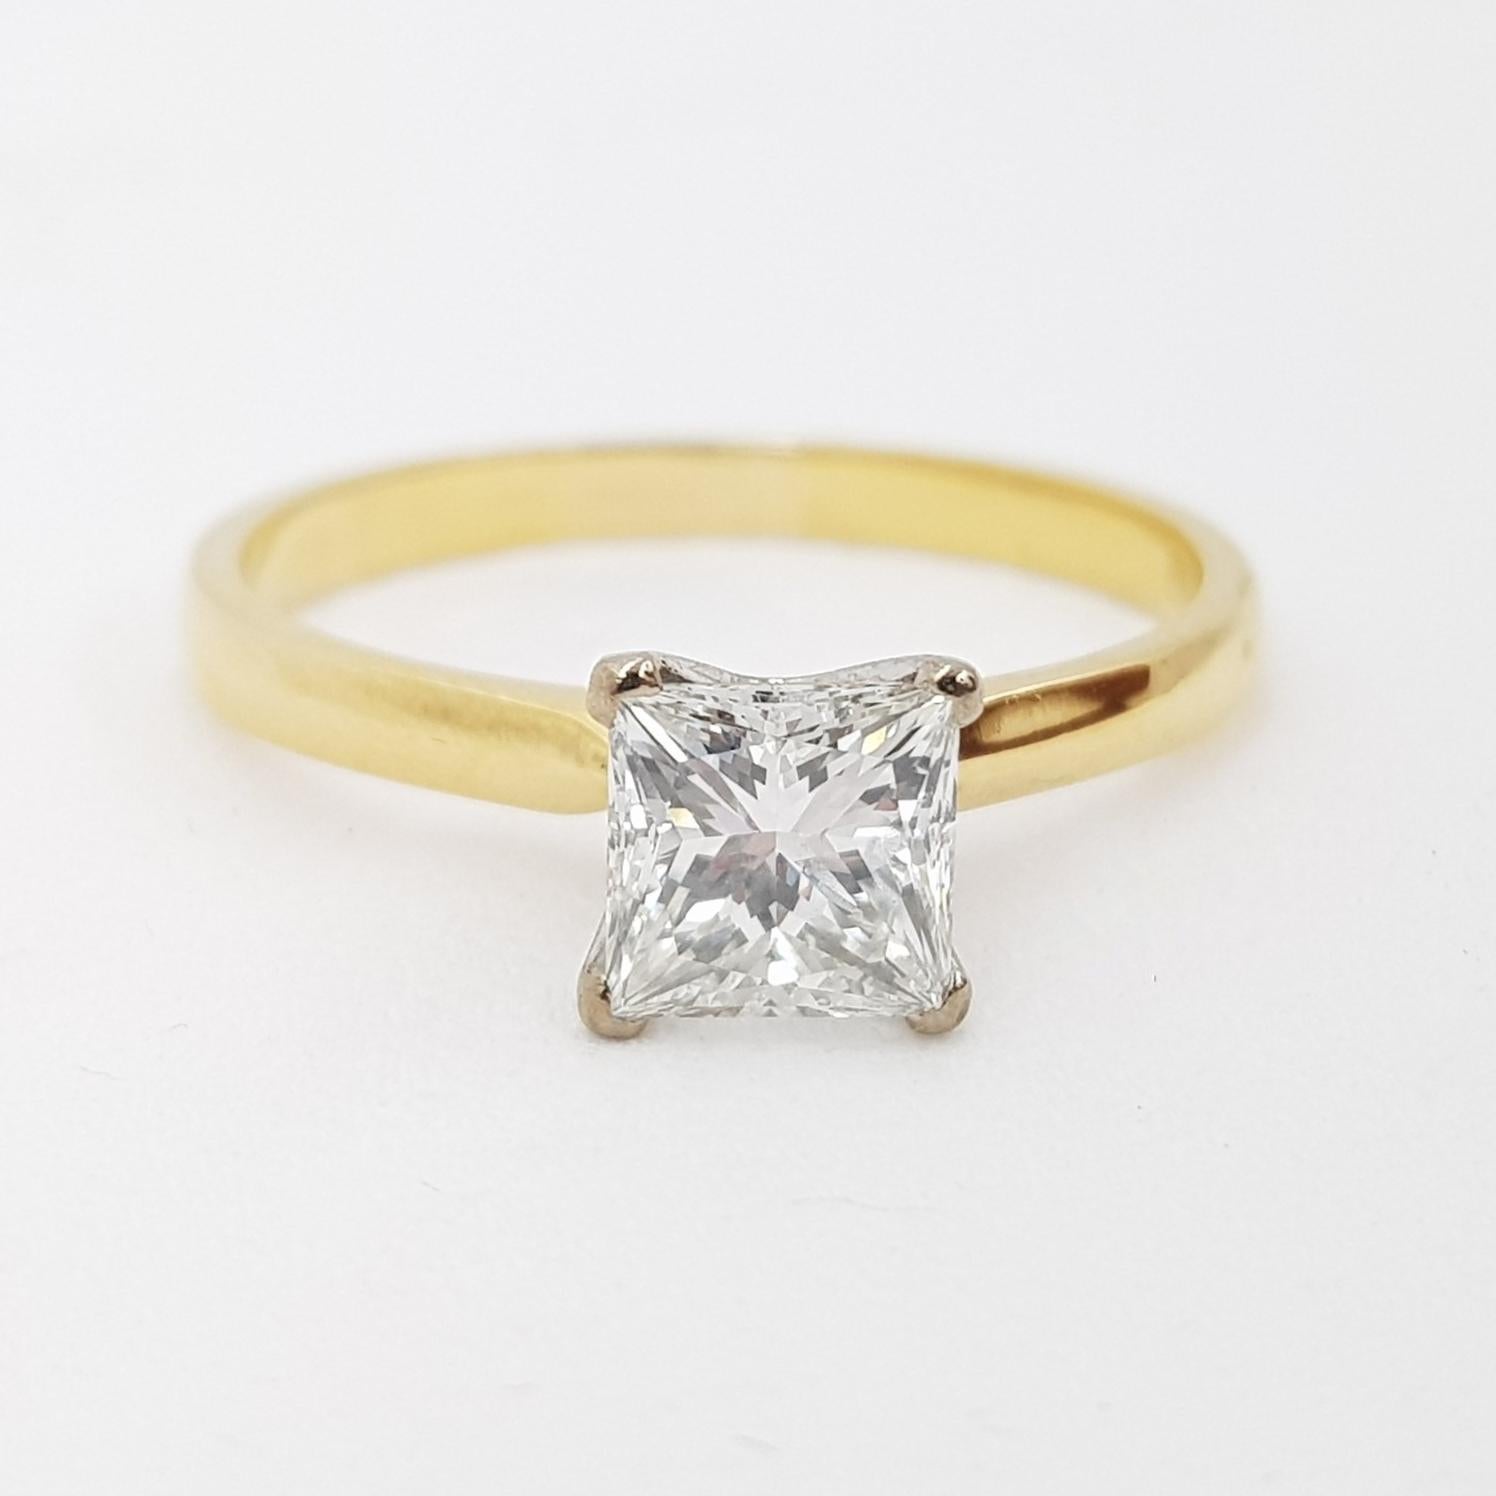 Modern 18ct Gold 1.23ct Princess Cut Solitaire Diamond Ring GIA Certified For Sale